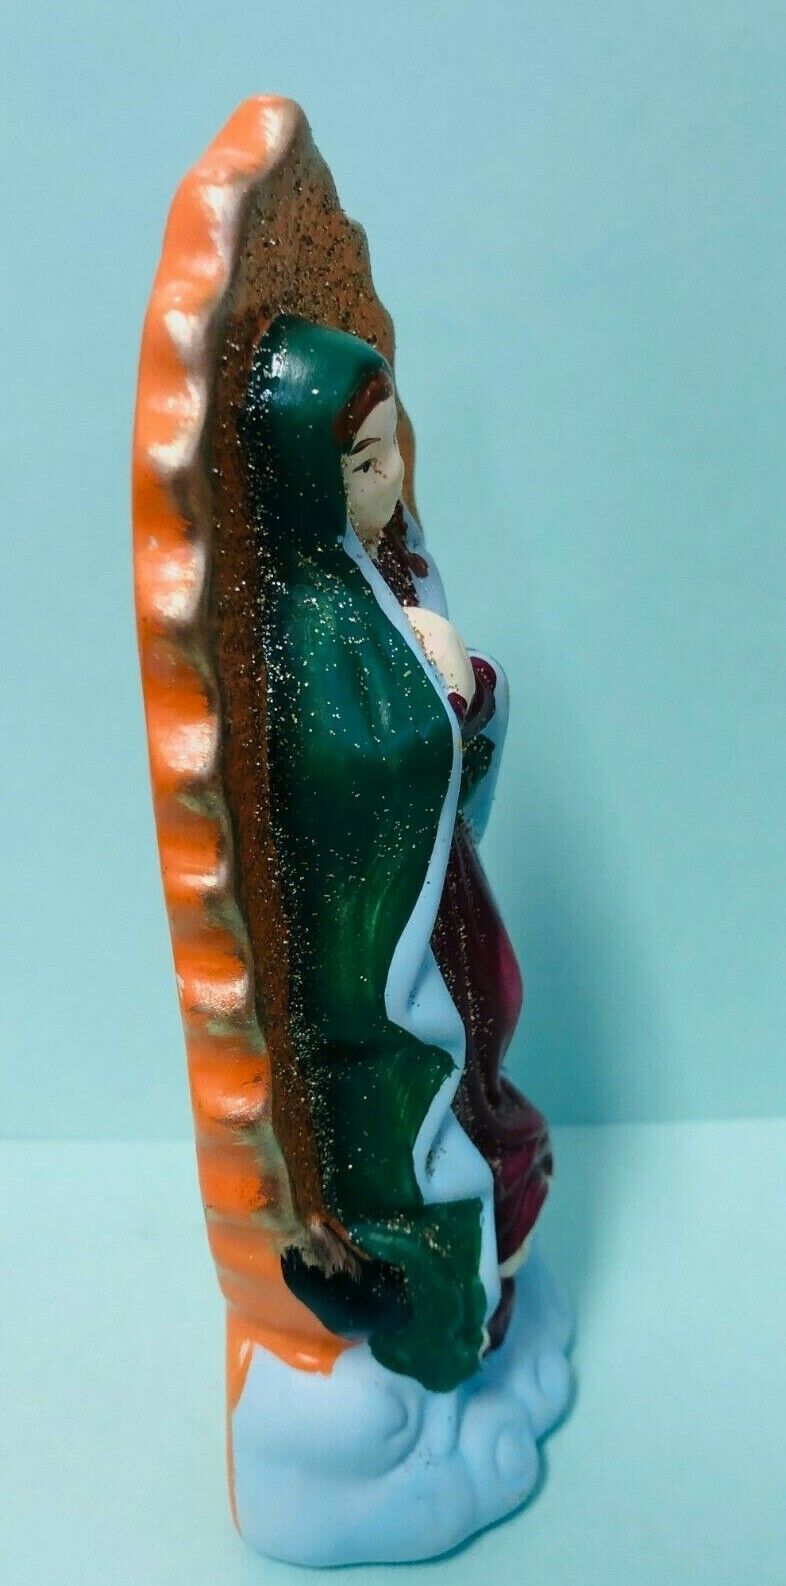 Our Lady of Guadalupe 6 1/2" H Statue, New